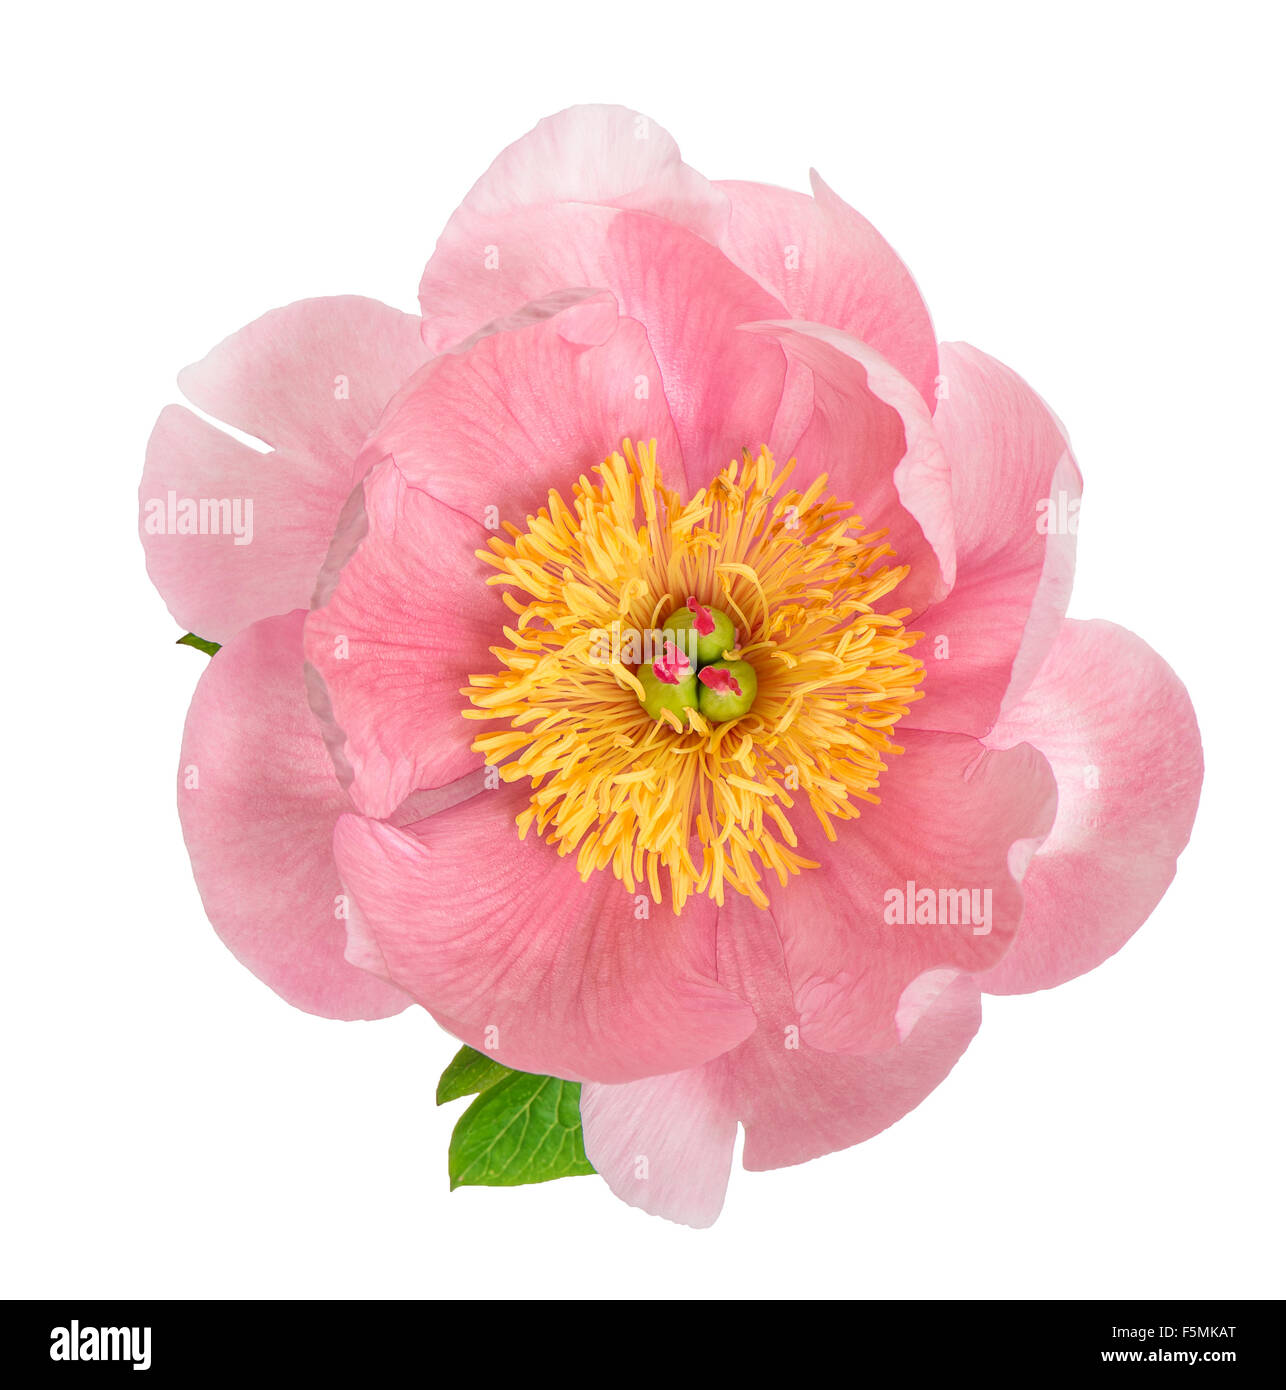 Pink peony blossom isolated on white background. Flower head Stock Photo